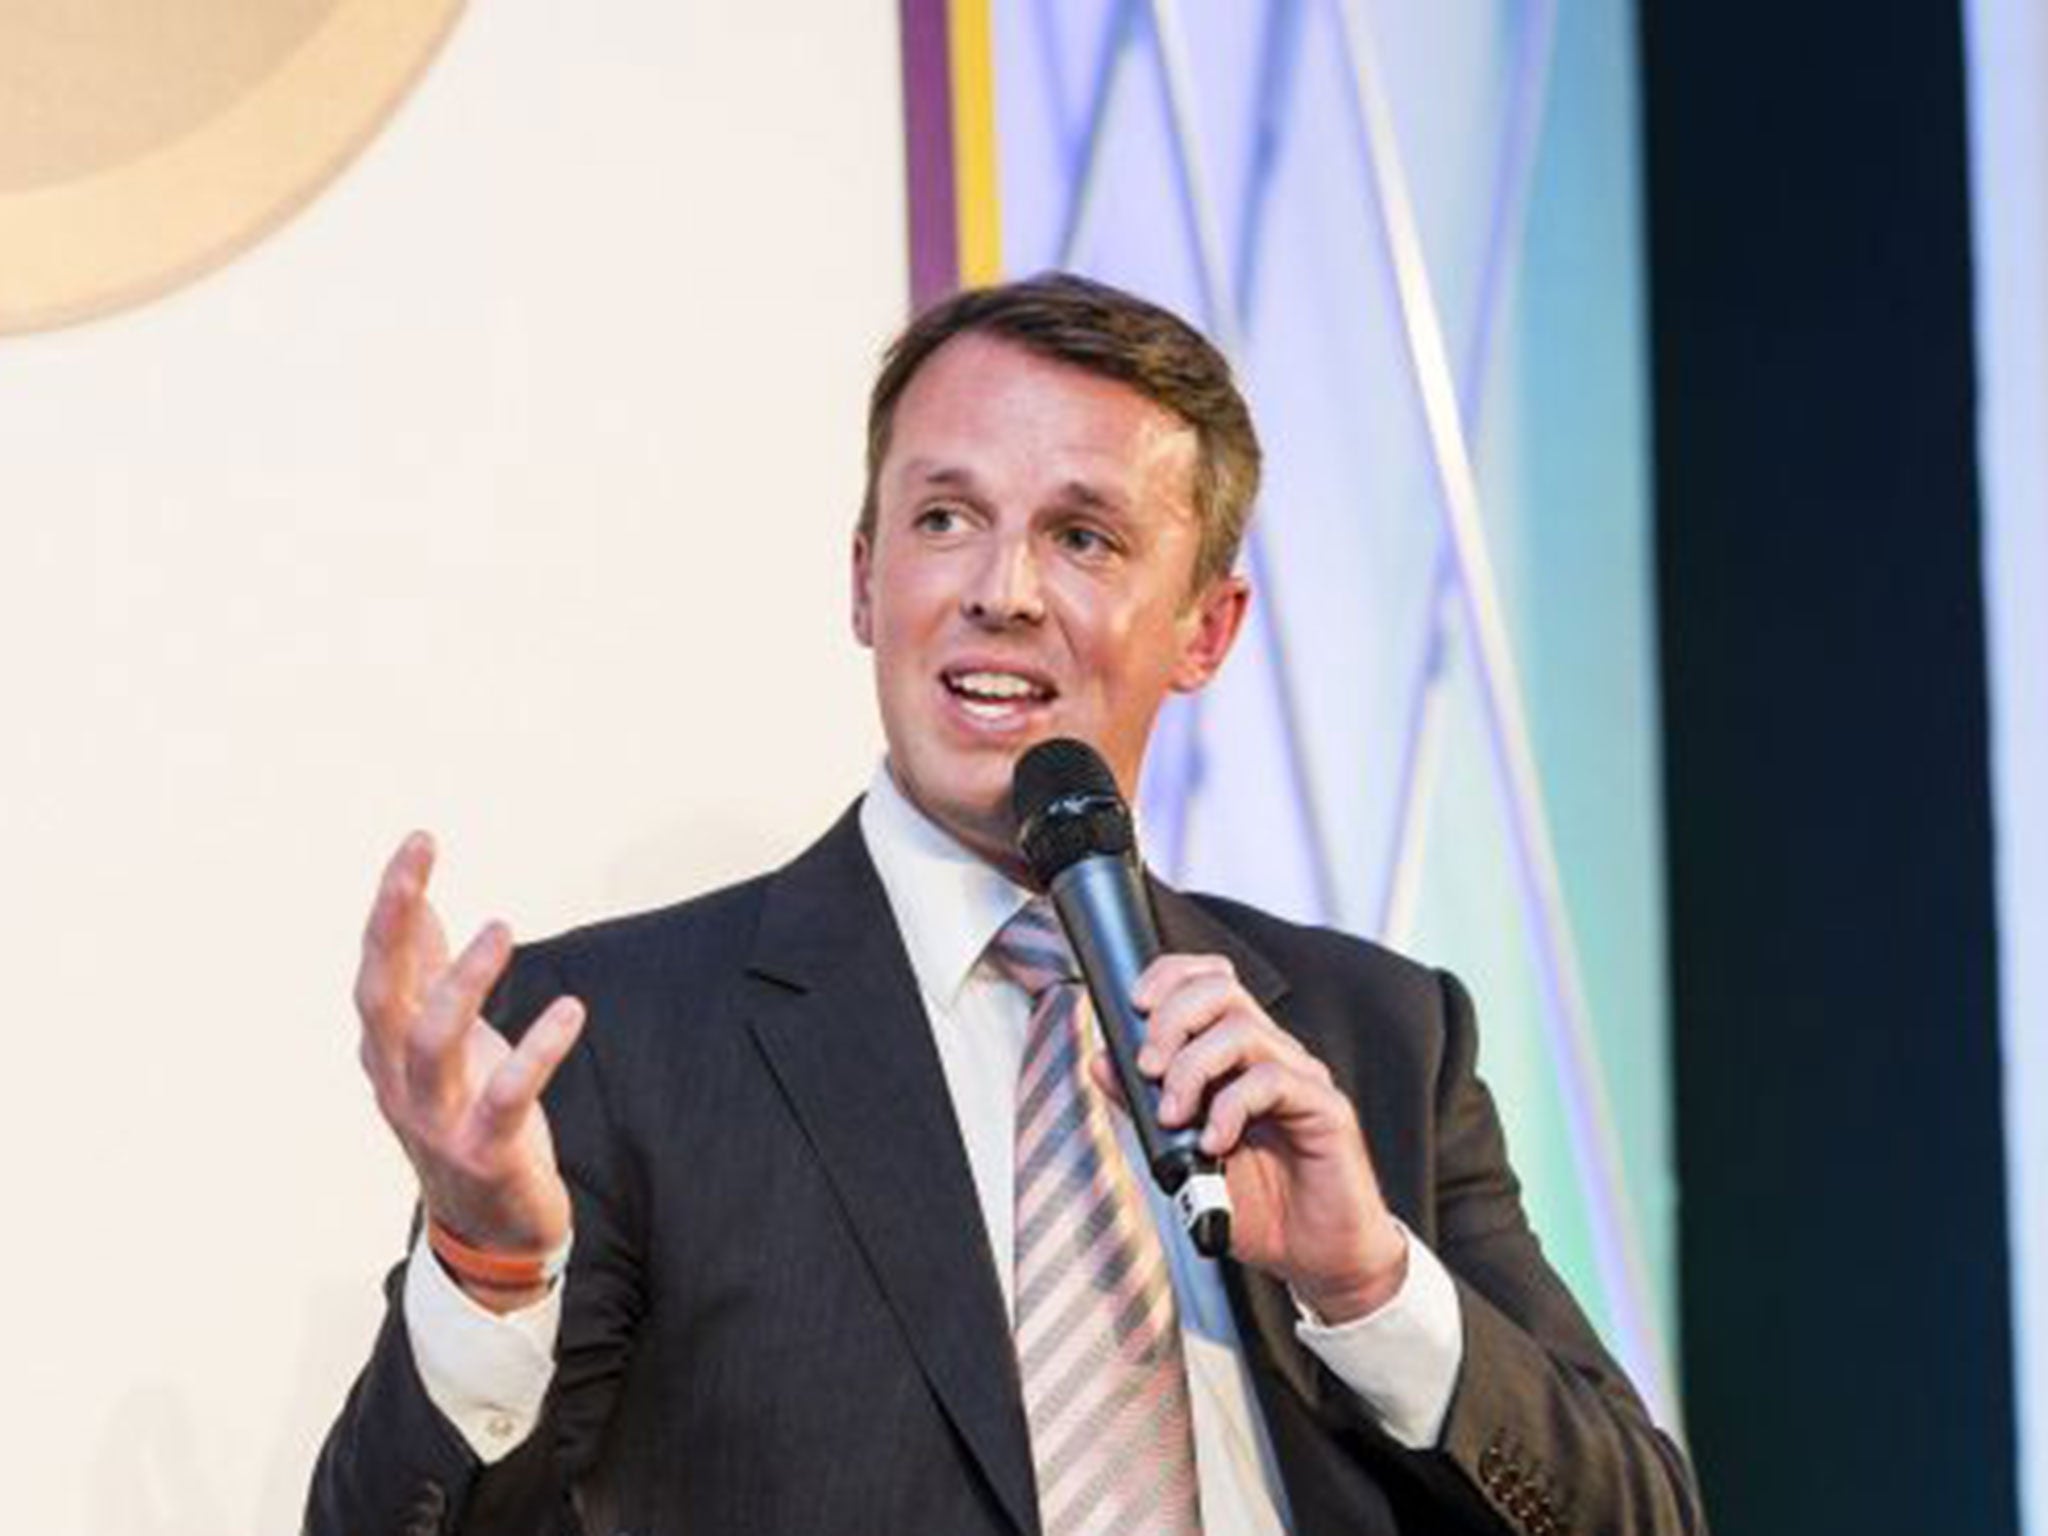 Graeme Swann was speaking at Lord’s at an awards ceremony for grass-roots cricket